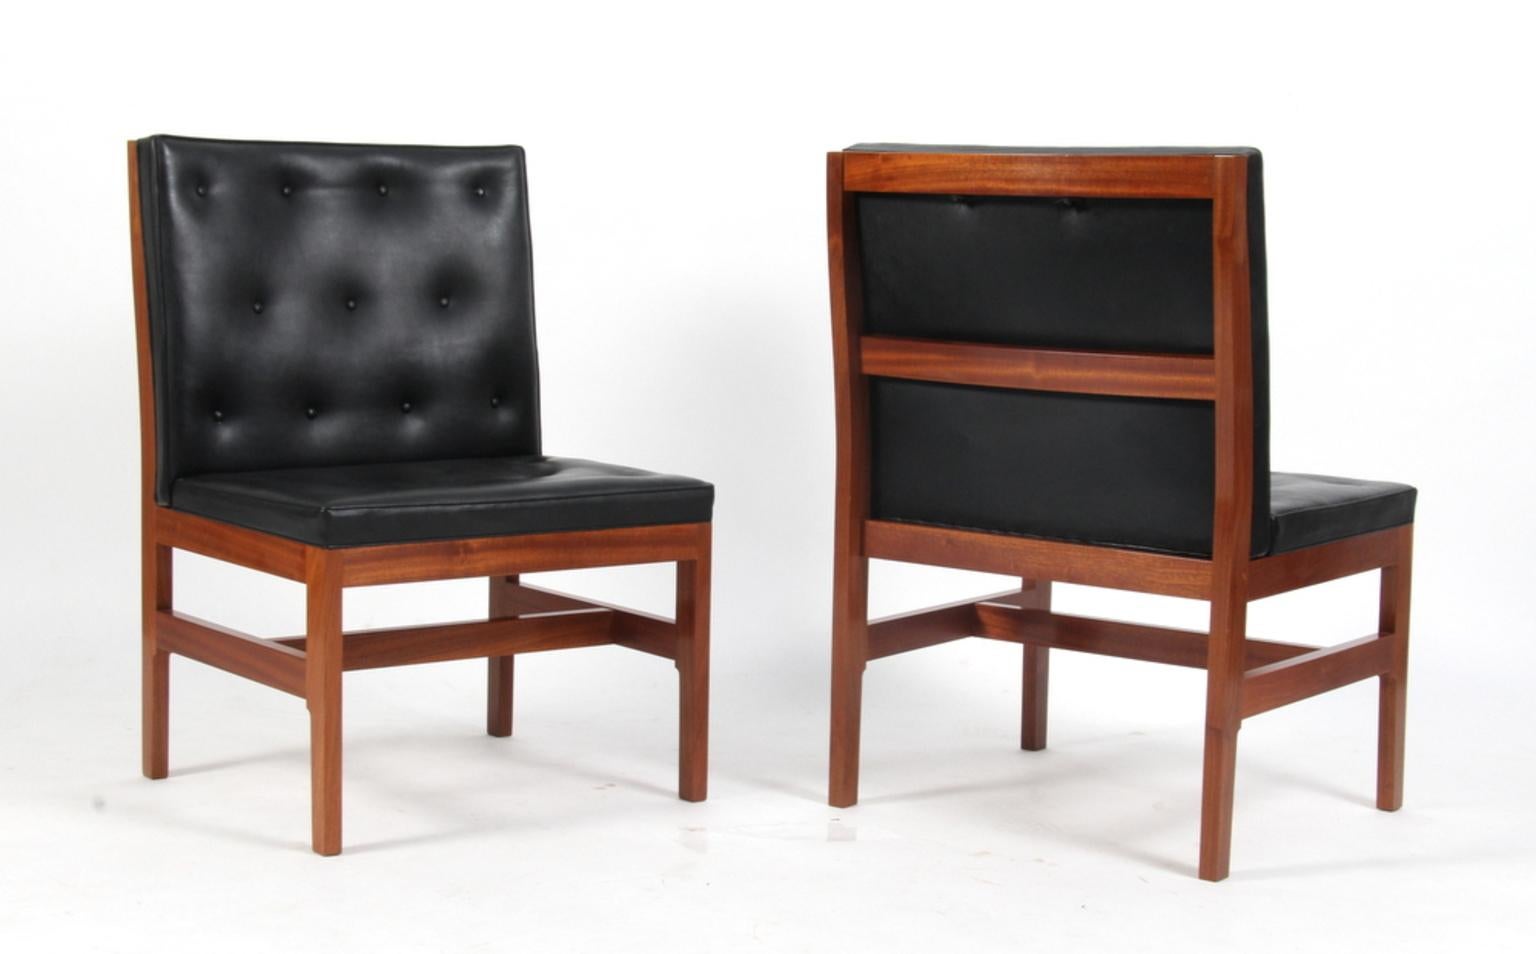 Lacquered Additional Chairs by Mogens Koch for Rud. Rasmussen